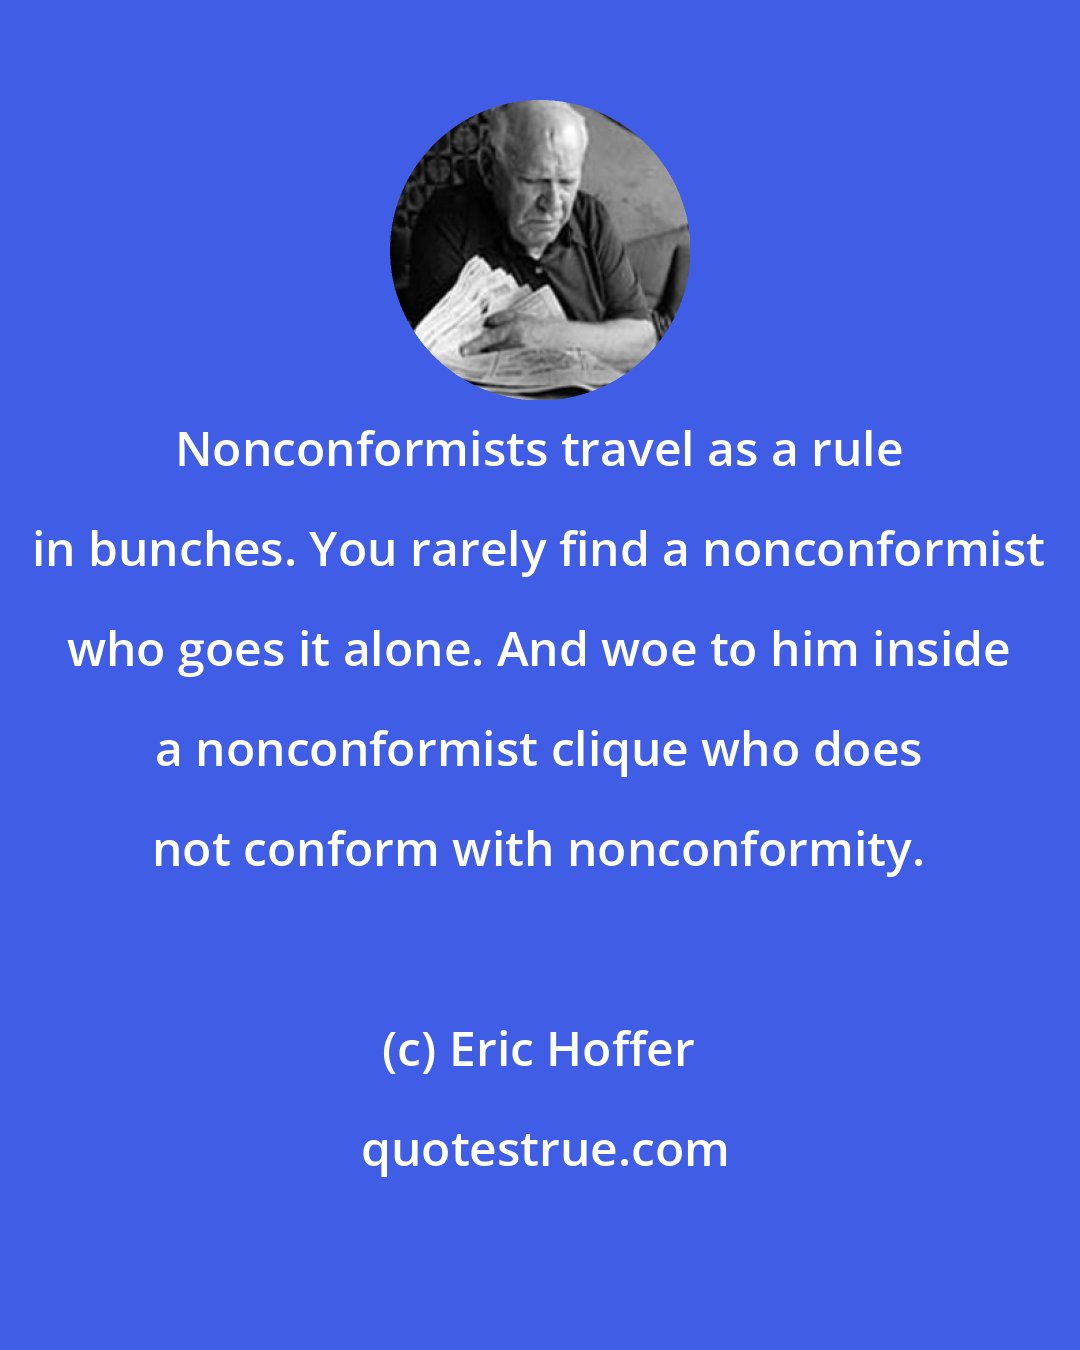 Eric Hoffer: Nonconformists travel as a rule in bunches. You rarely find a nonconformist who goes it alone. And woe to him inside a nonconformist clique who does not conform with nonconformity.